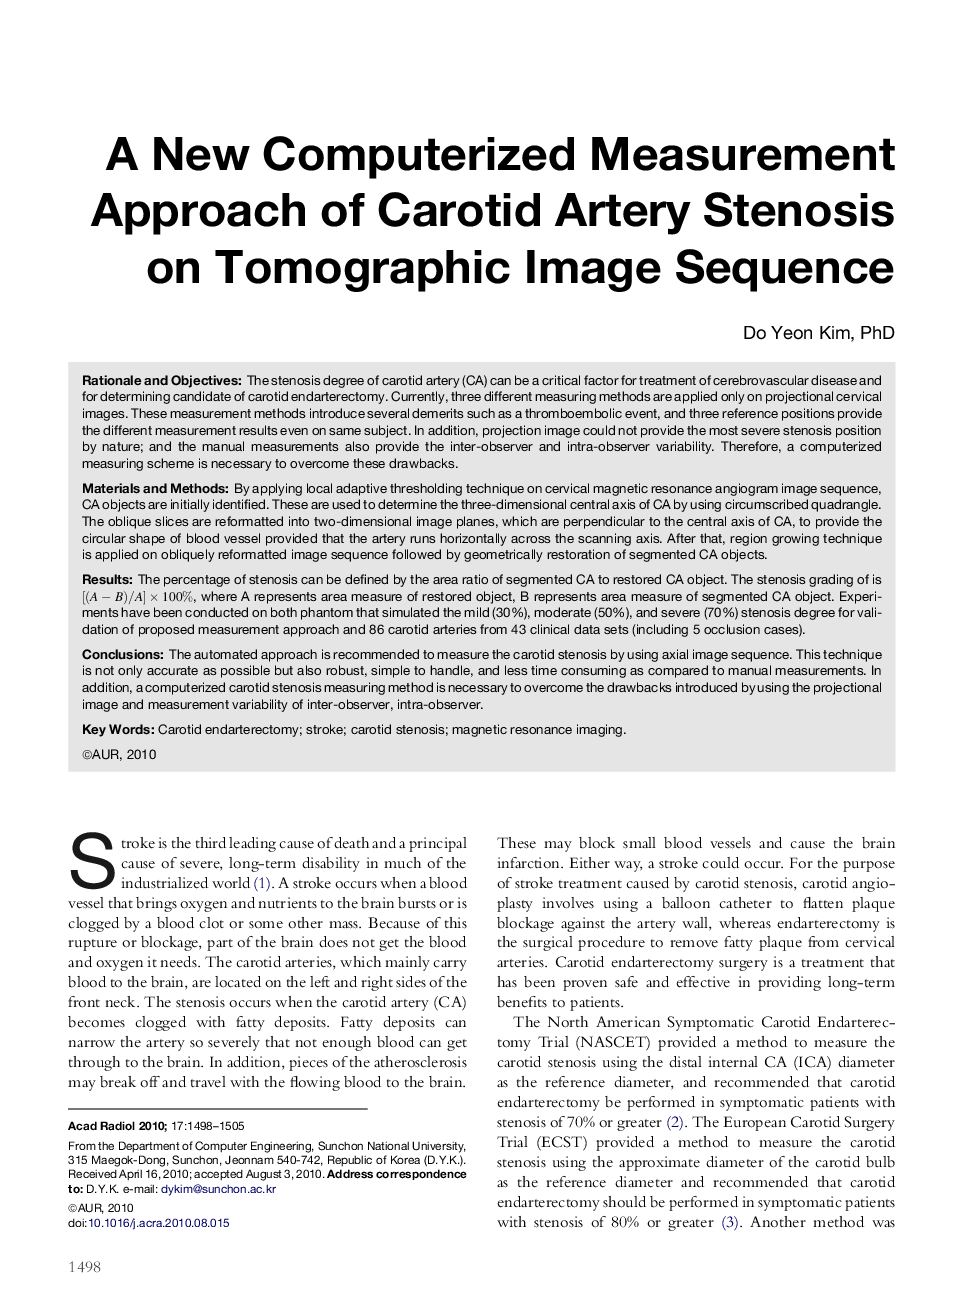 A New Computerized Measurement Approach of Carotid Artery Stenosis on Tomographic Image Sequence